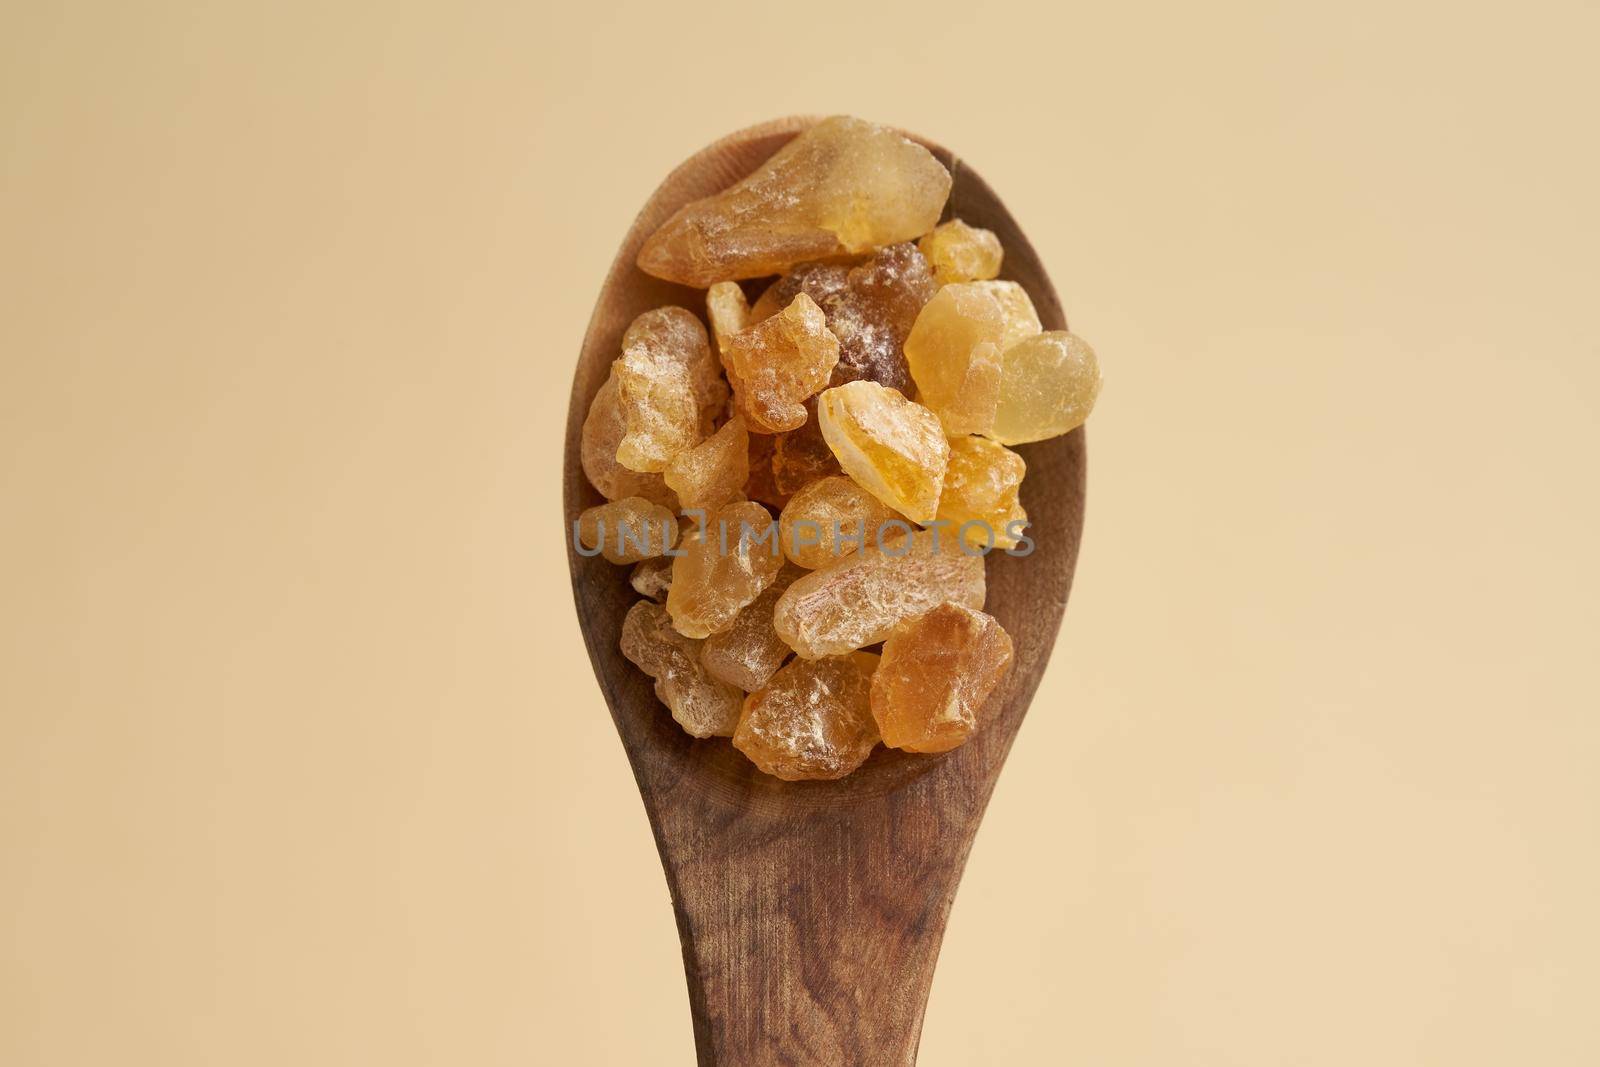 Frankincense resin crystals on a wooden spoon by madeleine_steinbach